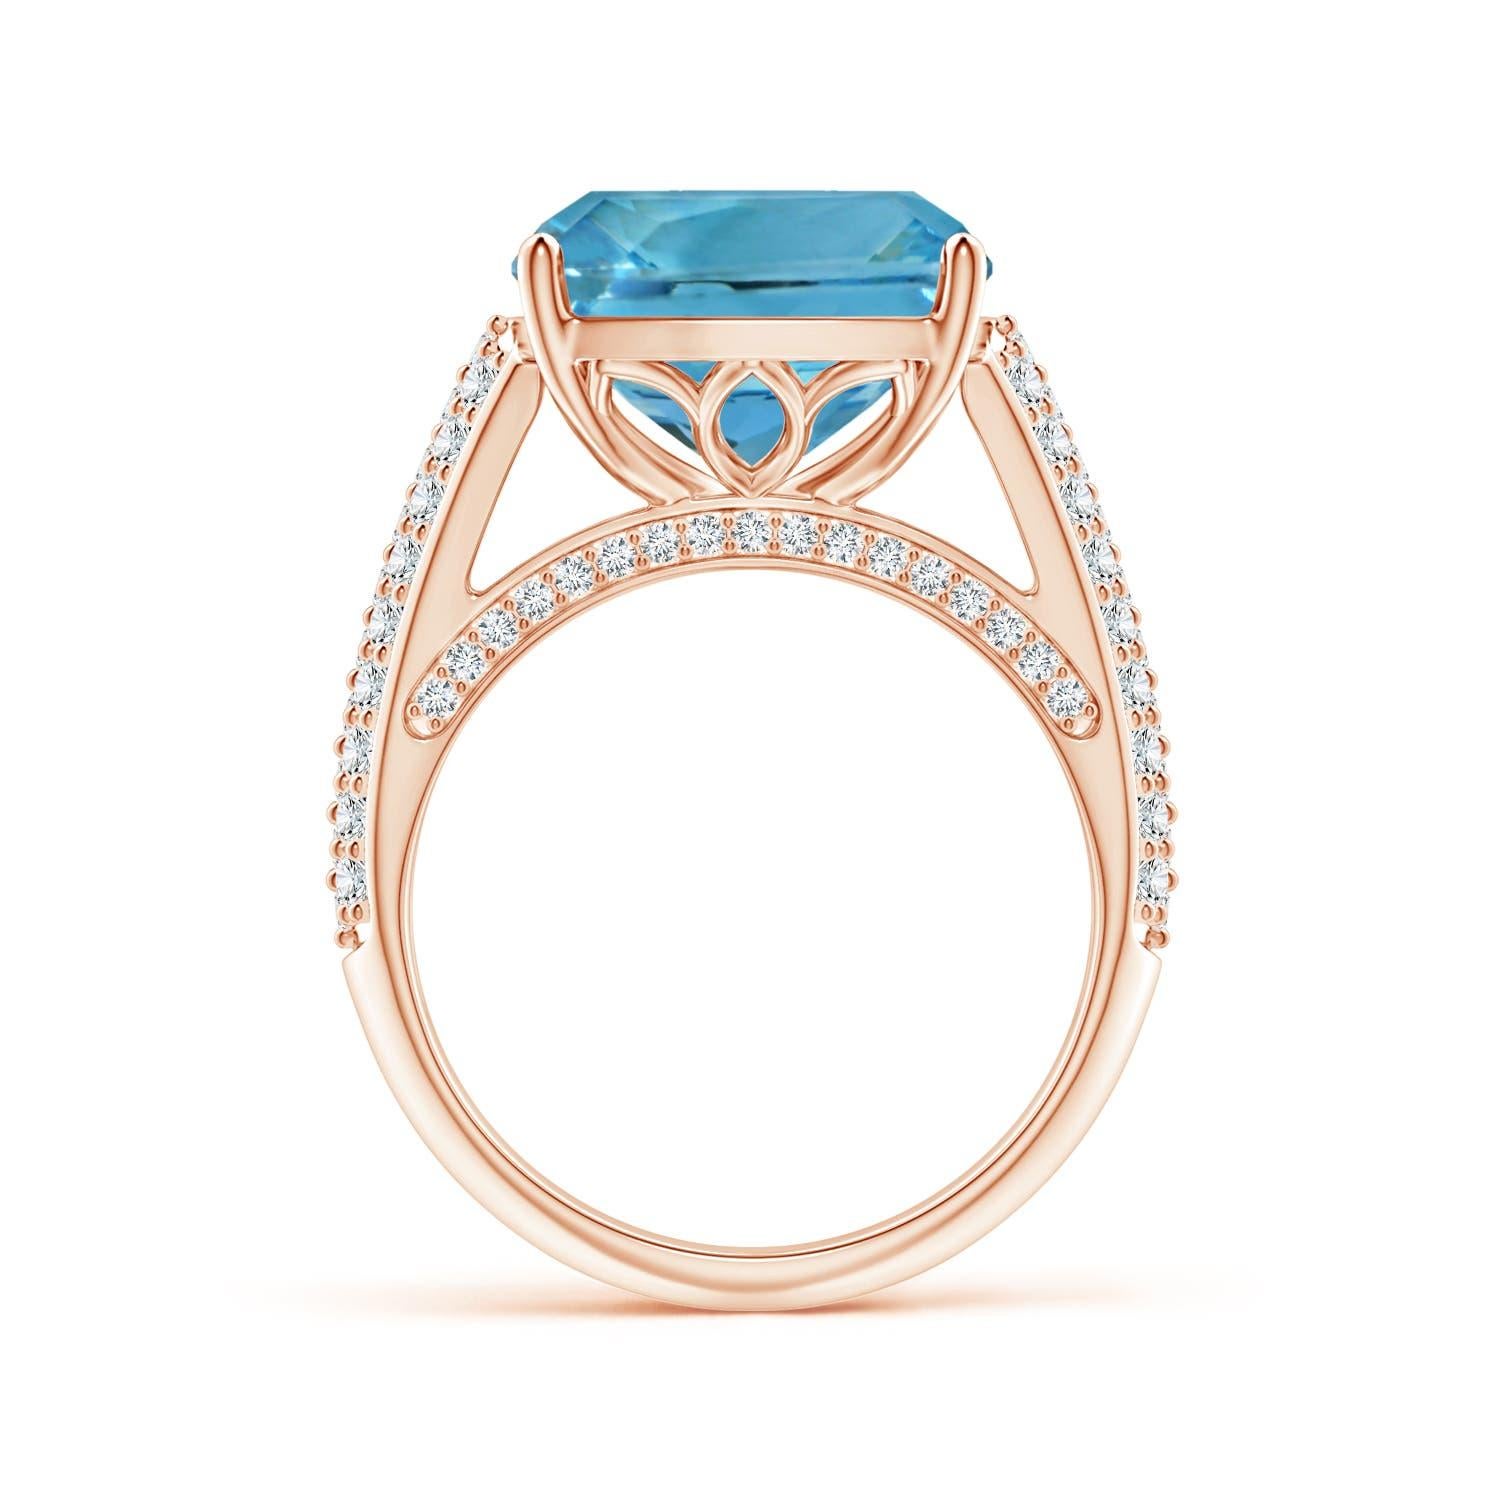 For Sale:  Angara Gia Certified Natural Aquamarine Ring in Rose Gold with Pave-Set Diamonds 2